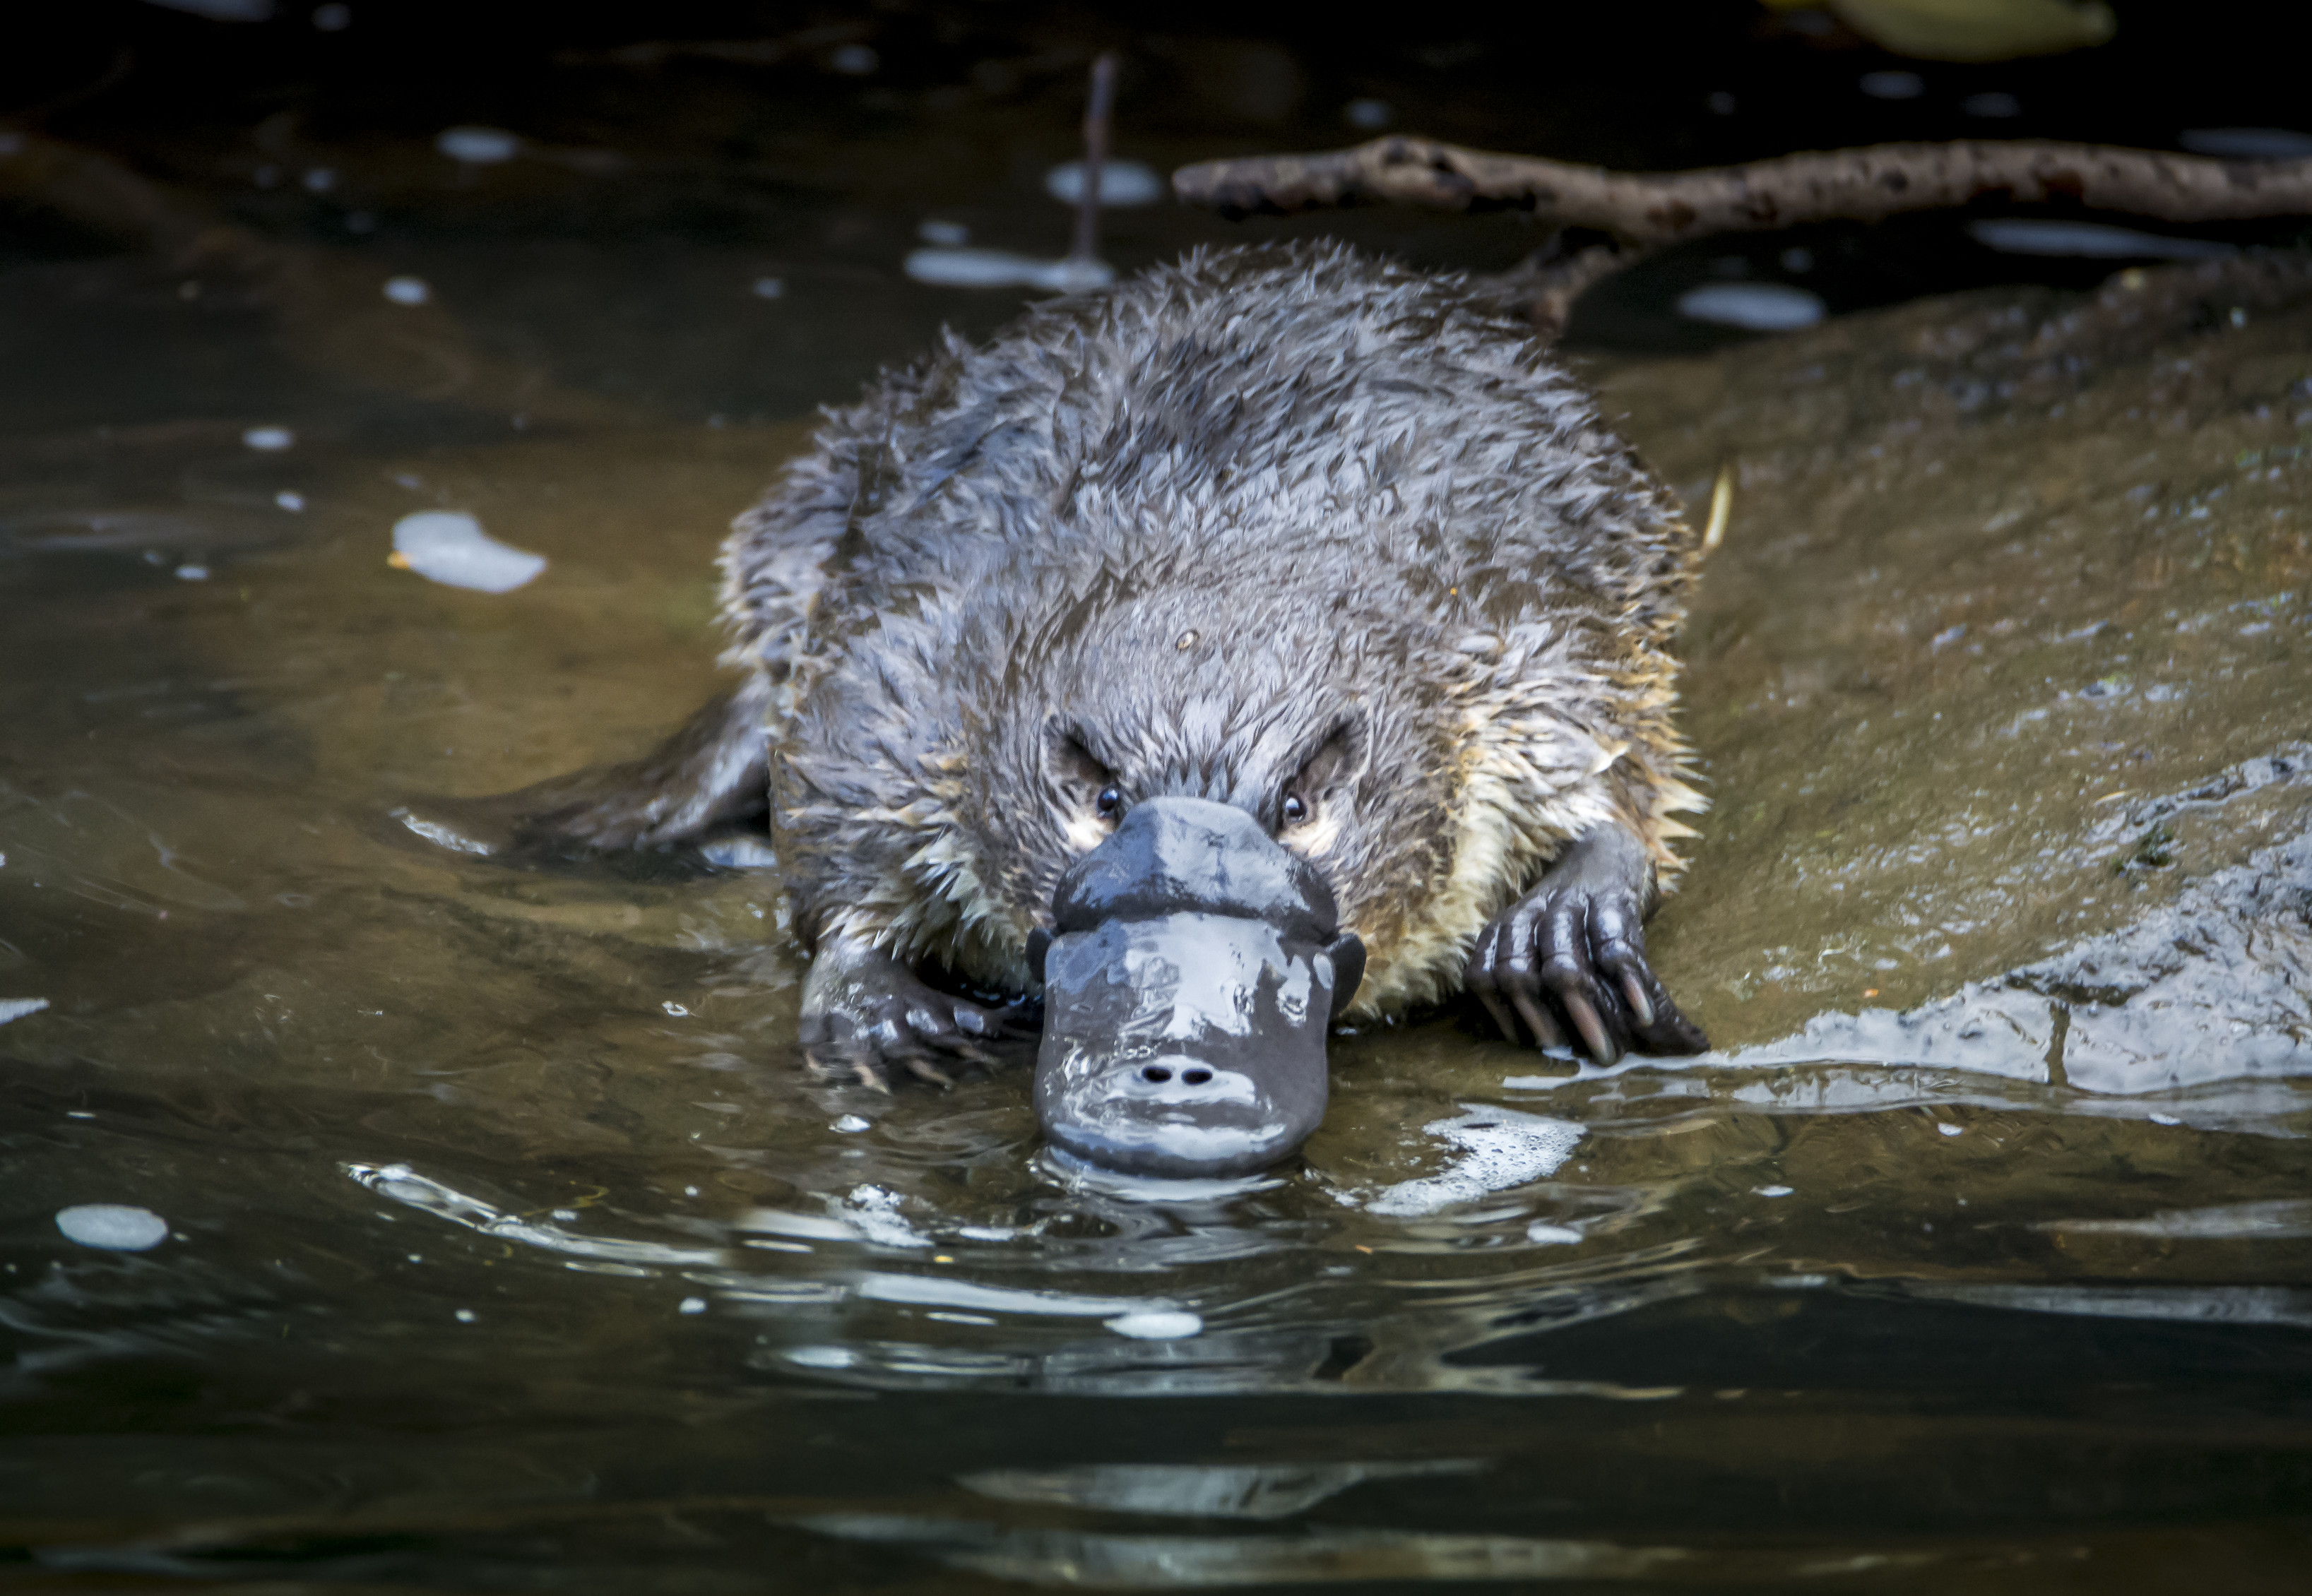 Dramatic close up image of a Platypus resting on a rock, in the water.